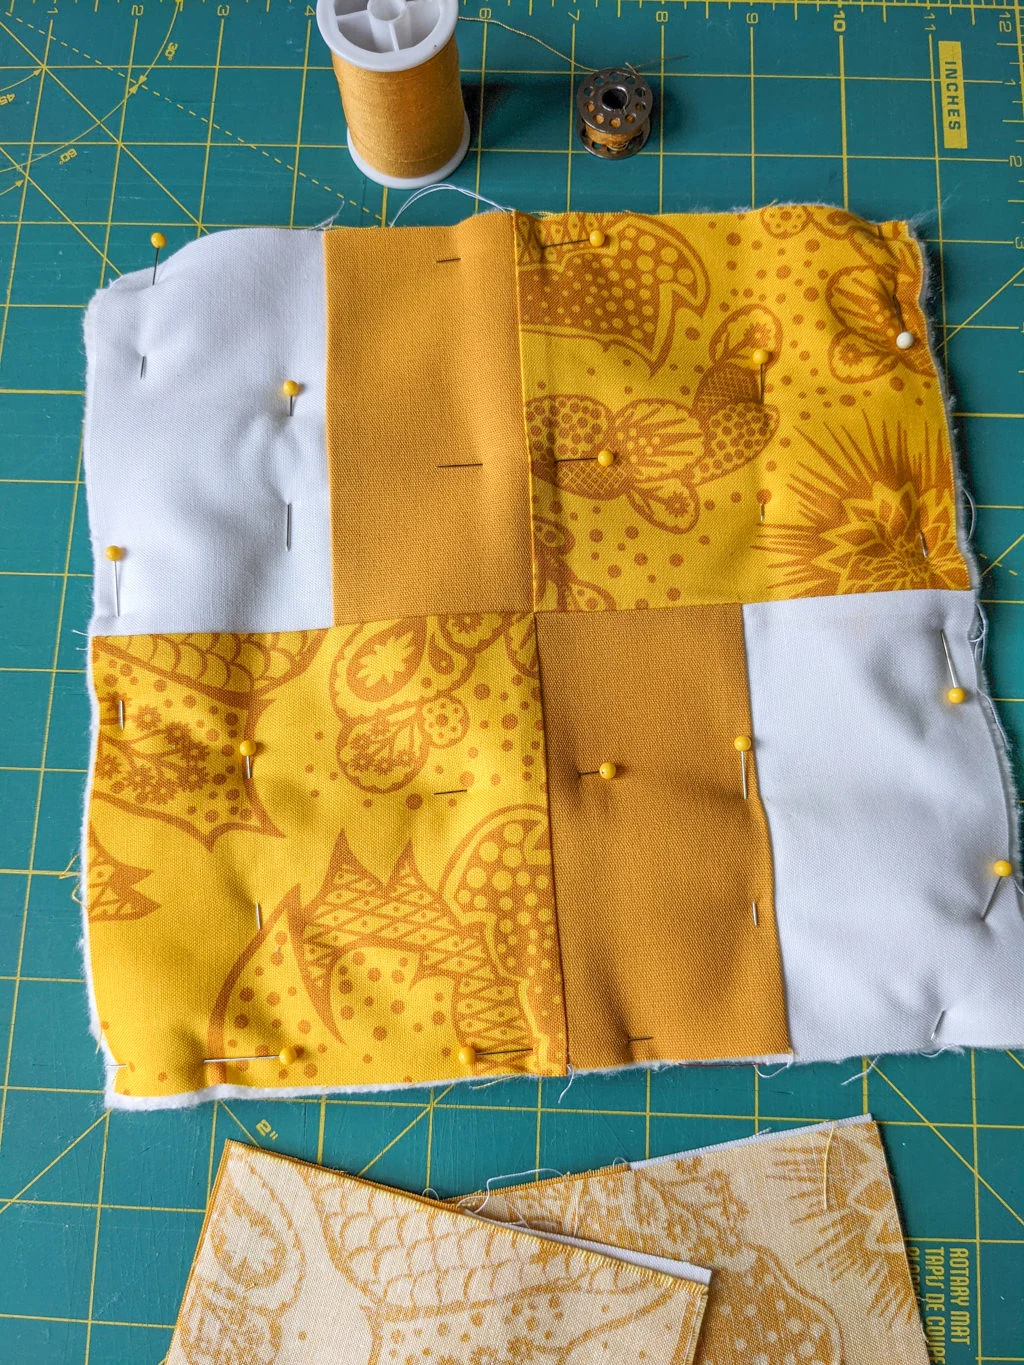 How to sew a quilted DIY patchwork potholder